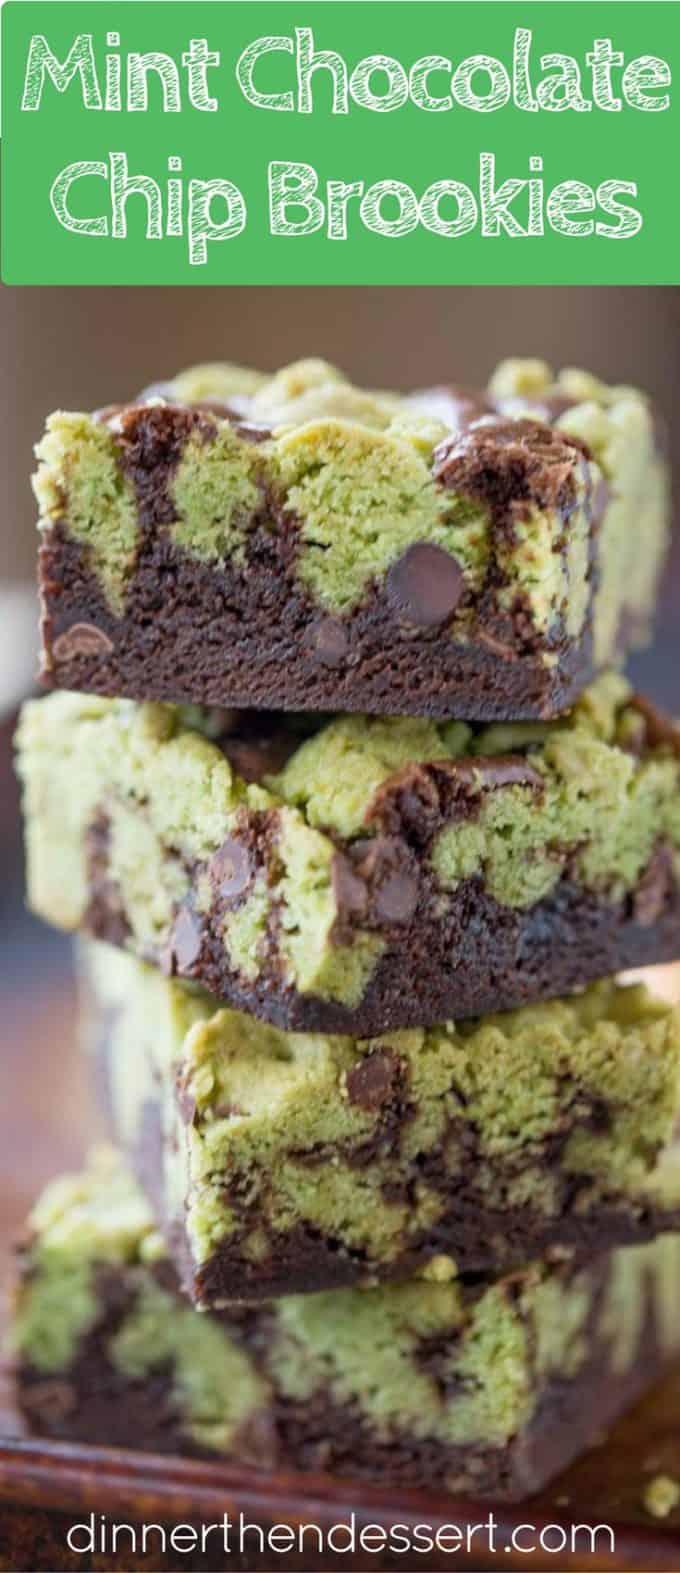 Mint Chocolate Chip Brookies are a delicious combination of mint chocolate chip cookies and rich dark chocolate brownies that tastes like your favorite thin mint cookies.